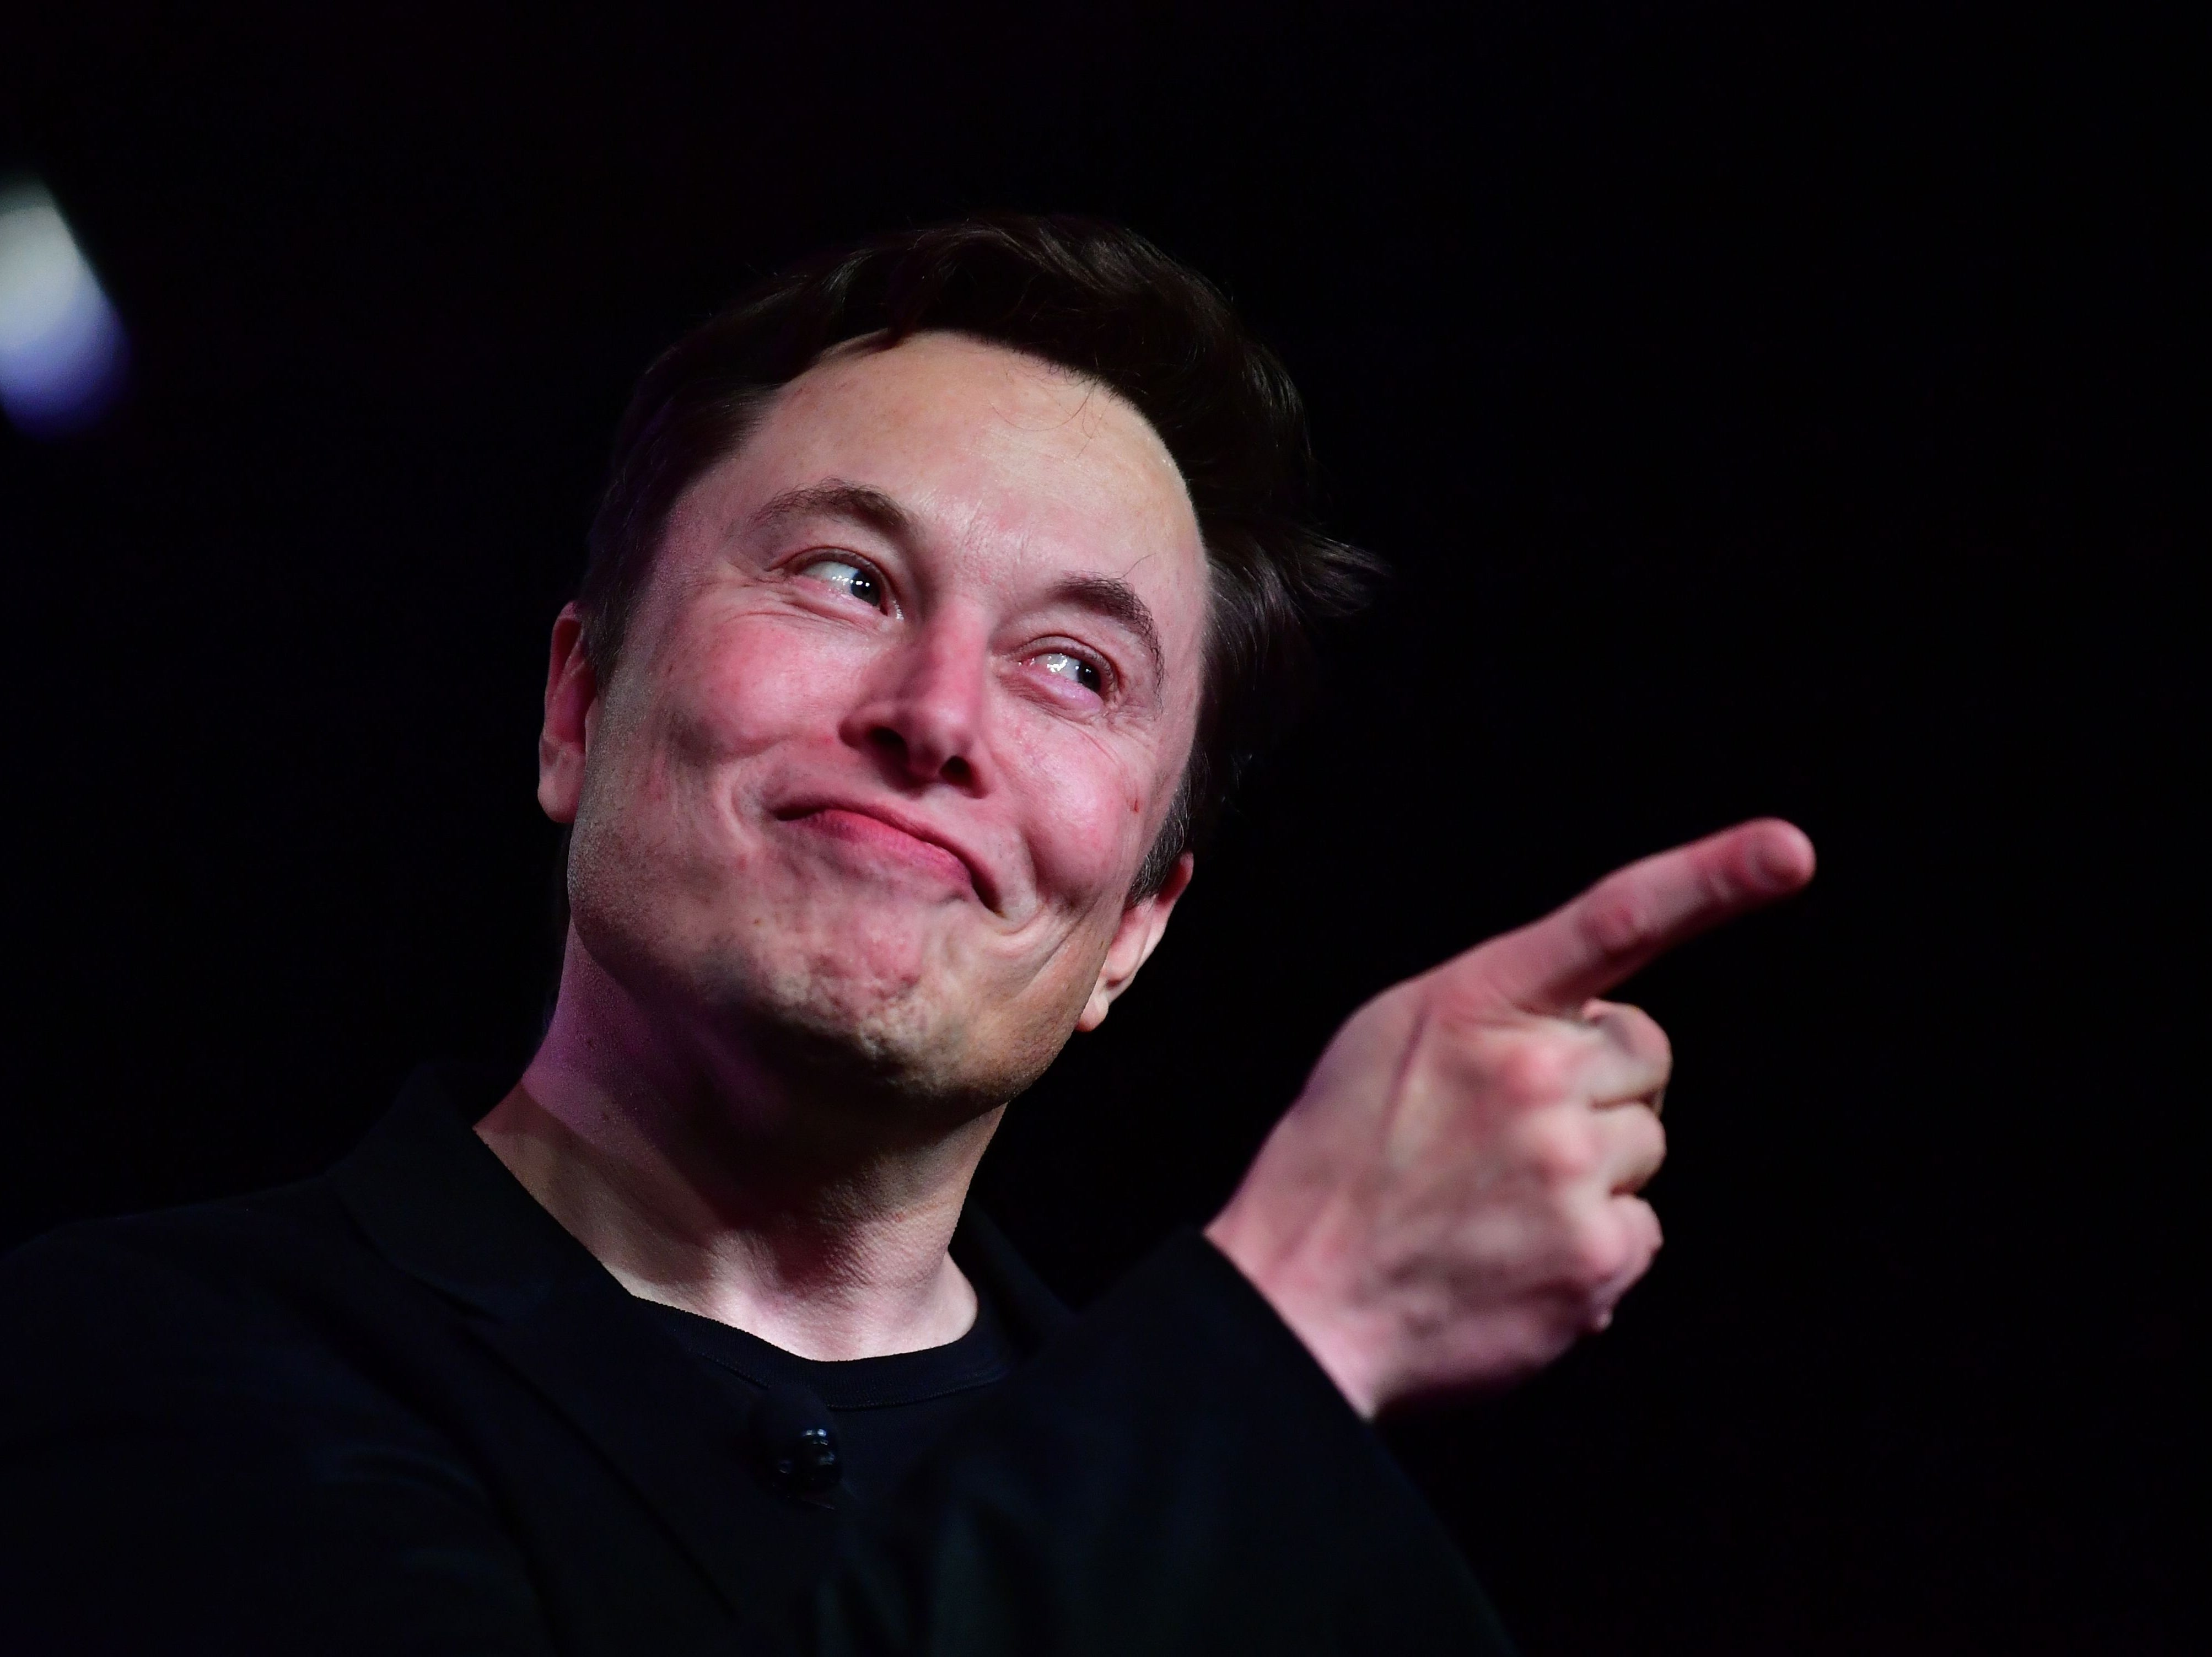 Tesla CEO Elon Musk speaks during the unveiling of the new Tesla Model Y in Hawthorne, California on 14 March, 2019